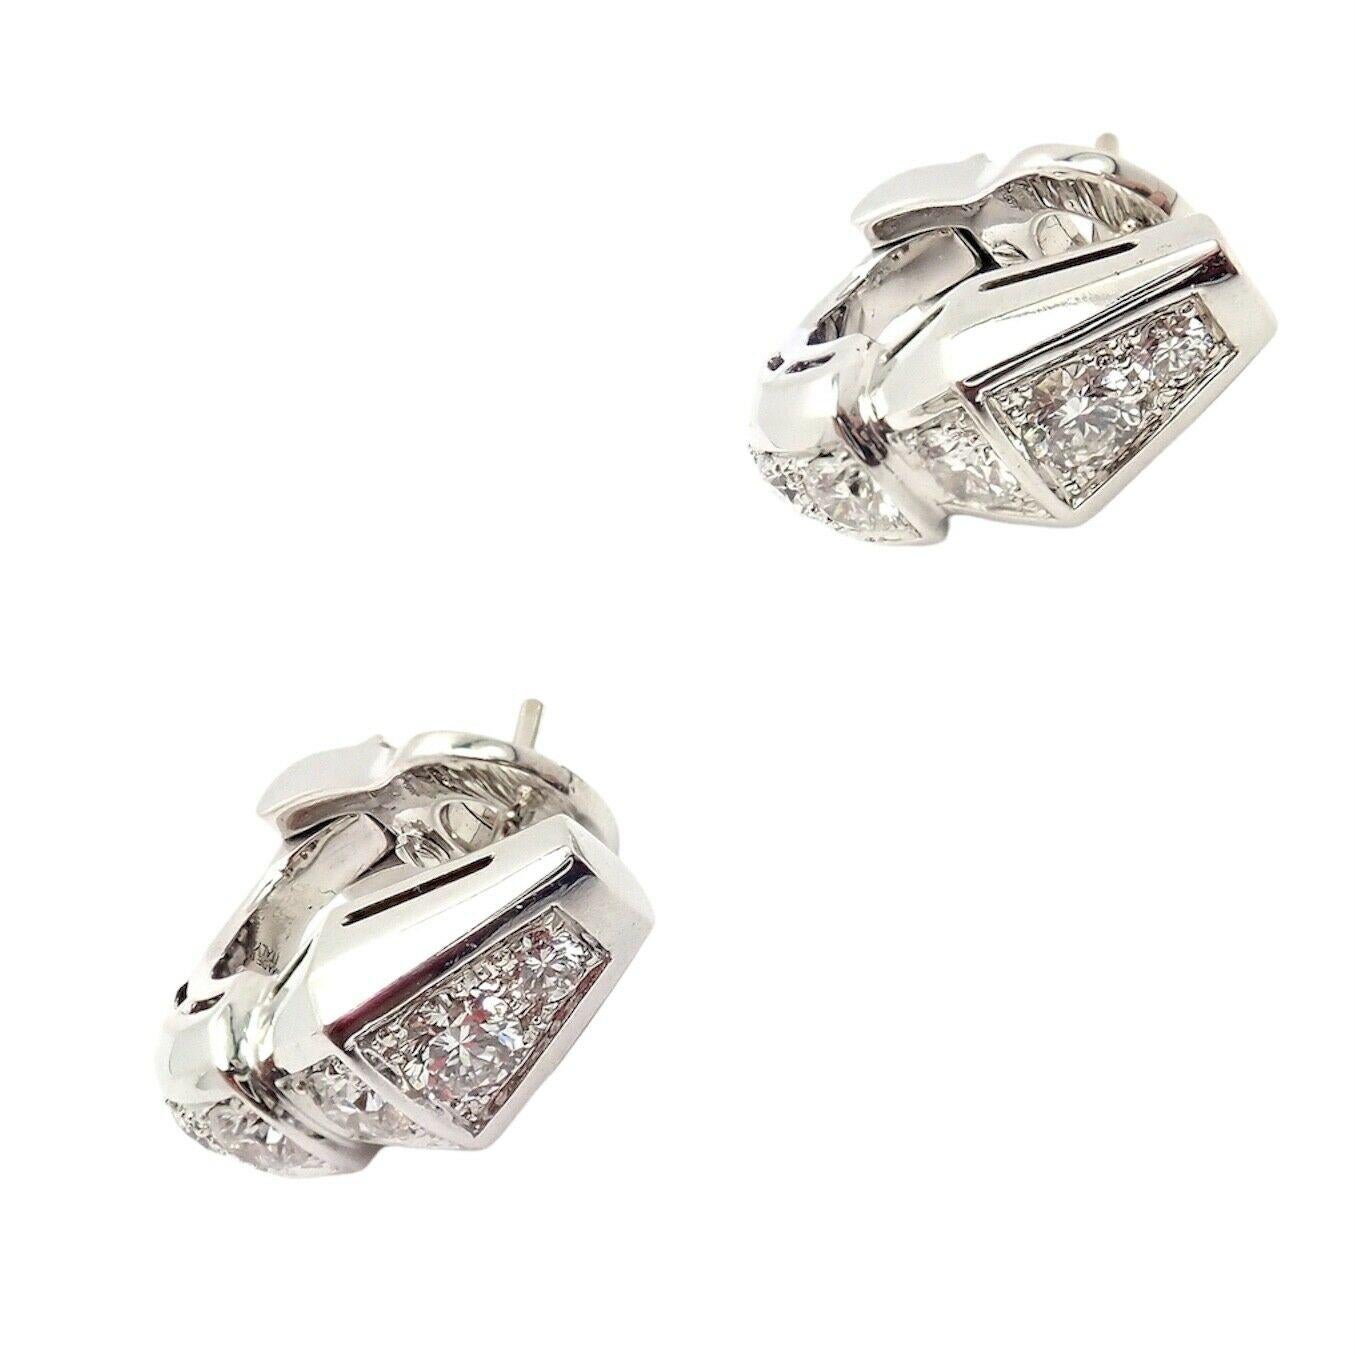 18k White Gold Diamond Serpenti Snake Huggie Earrings by Bulgari. 
With 14 round brilliant cut diamonds VS1 clarity, G color total weight approx. 1.52ctw
These earrings are for pierced ears and they come with Bulgari box and